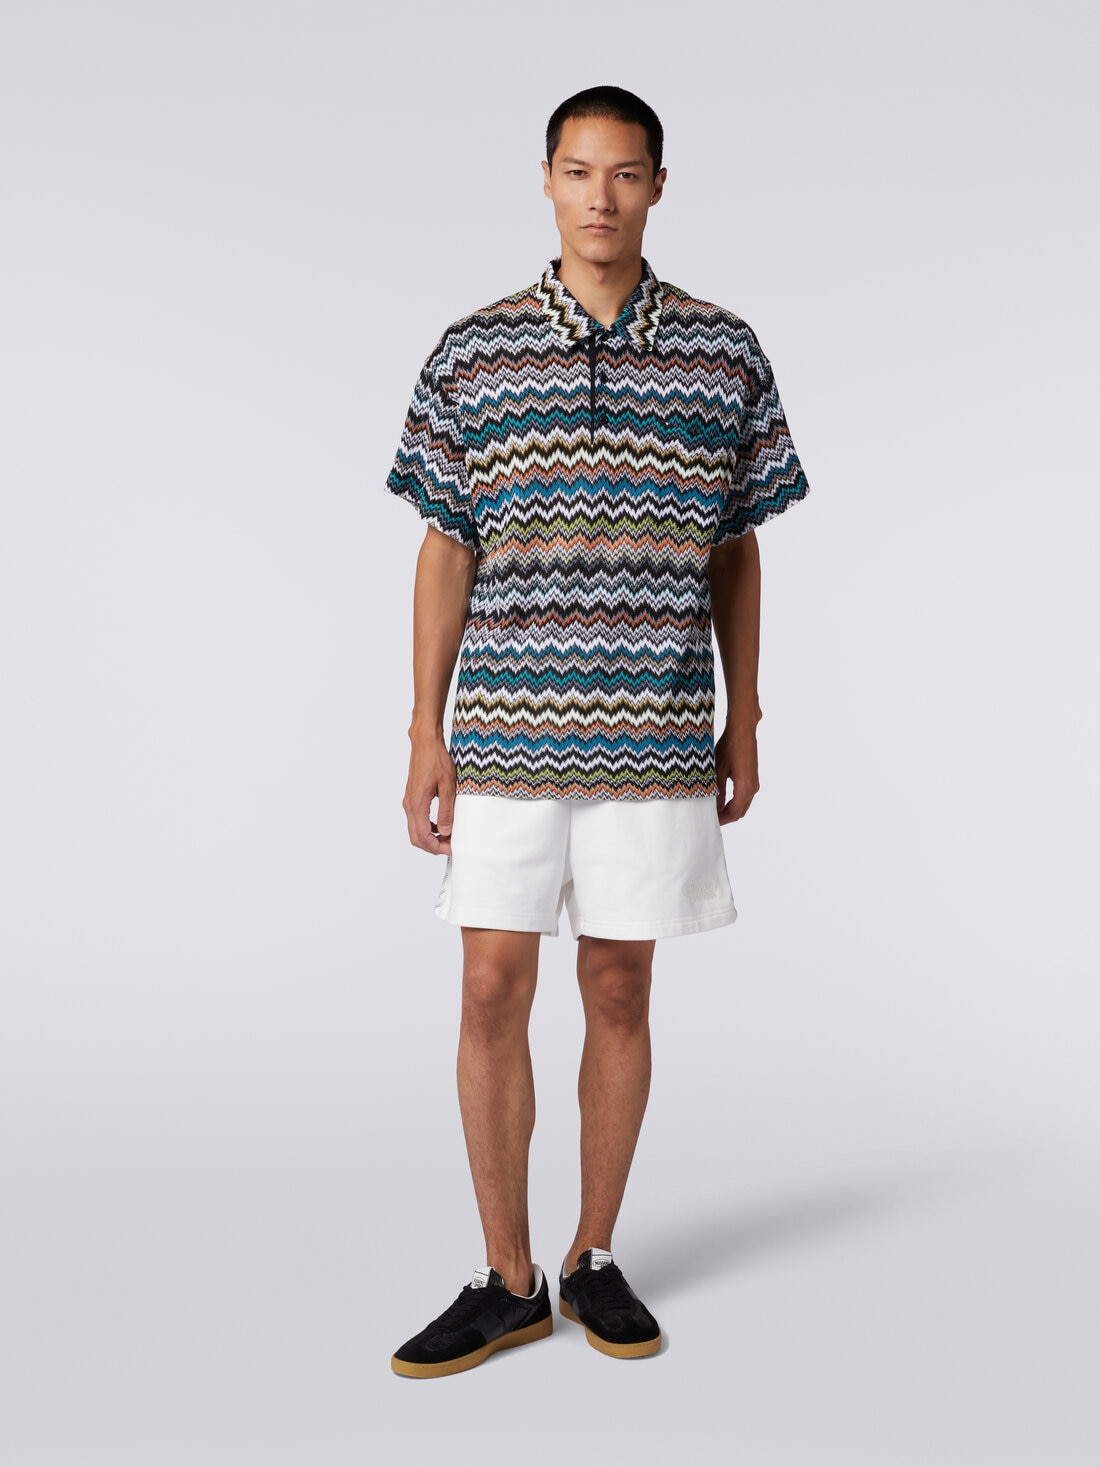 Polo shirt in zigzag cotton and viscose knit, Multicoloured  - TS24S201BR00UUSM9AX - 1